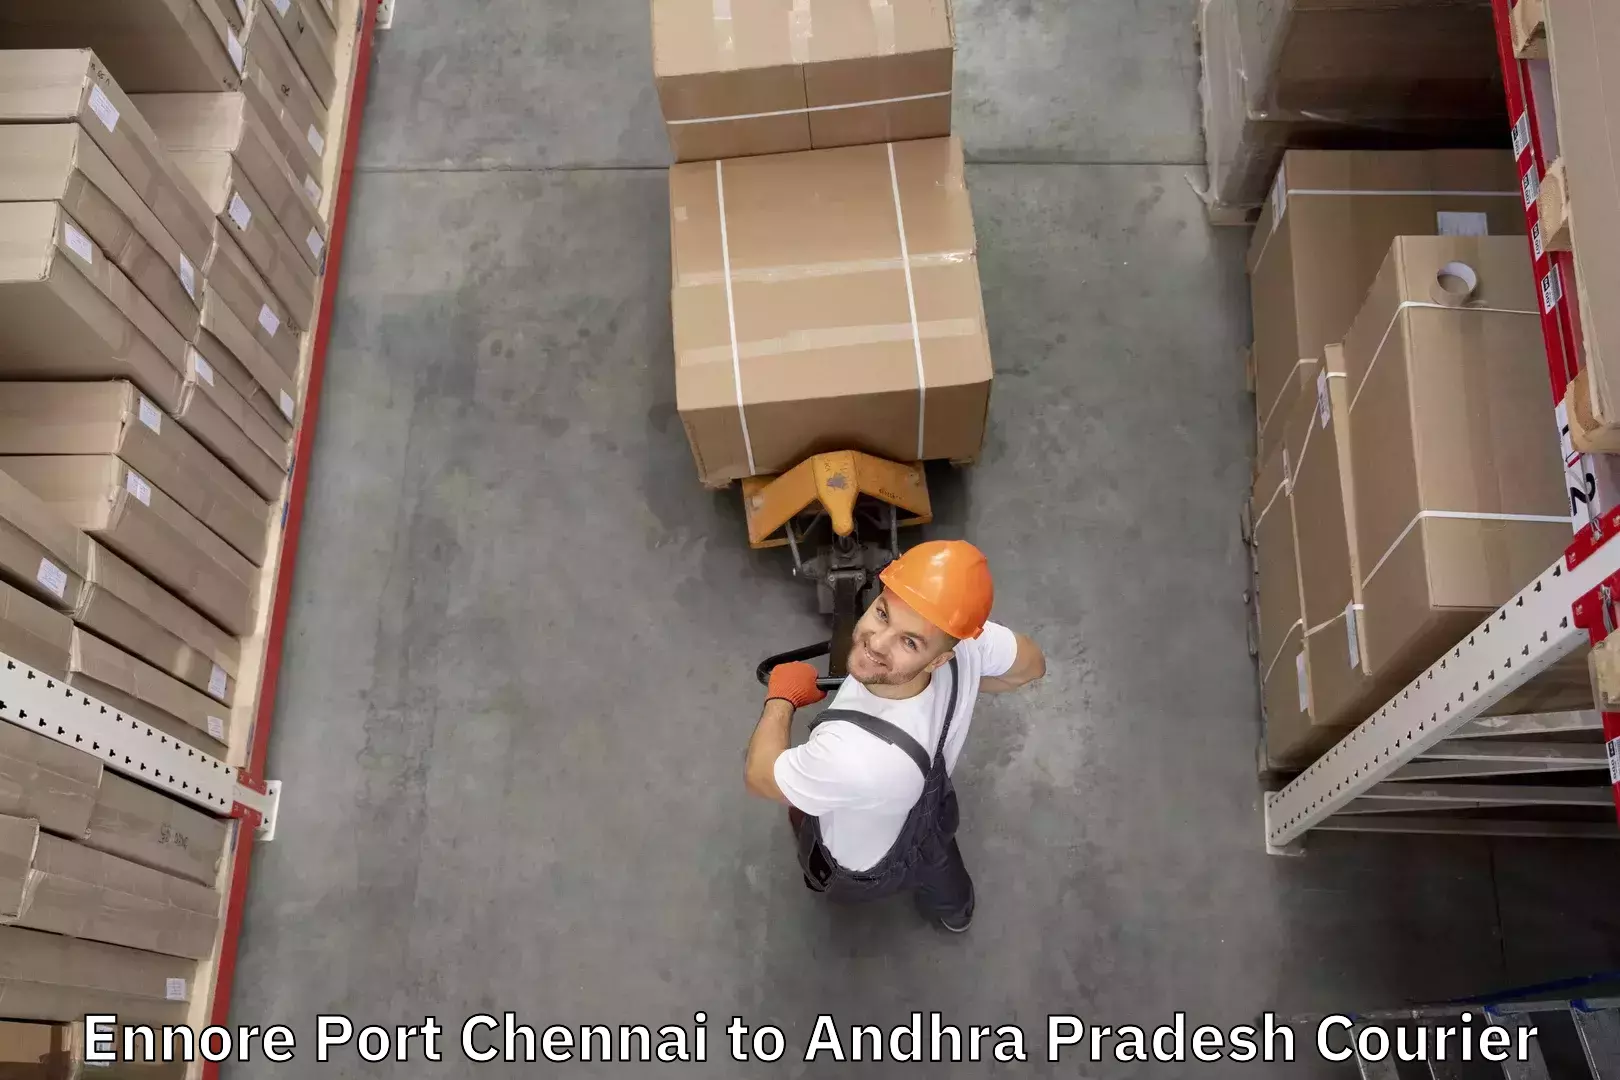 Luggage delivery network Ennore Port Chennai to Bobbili